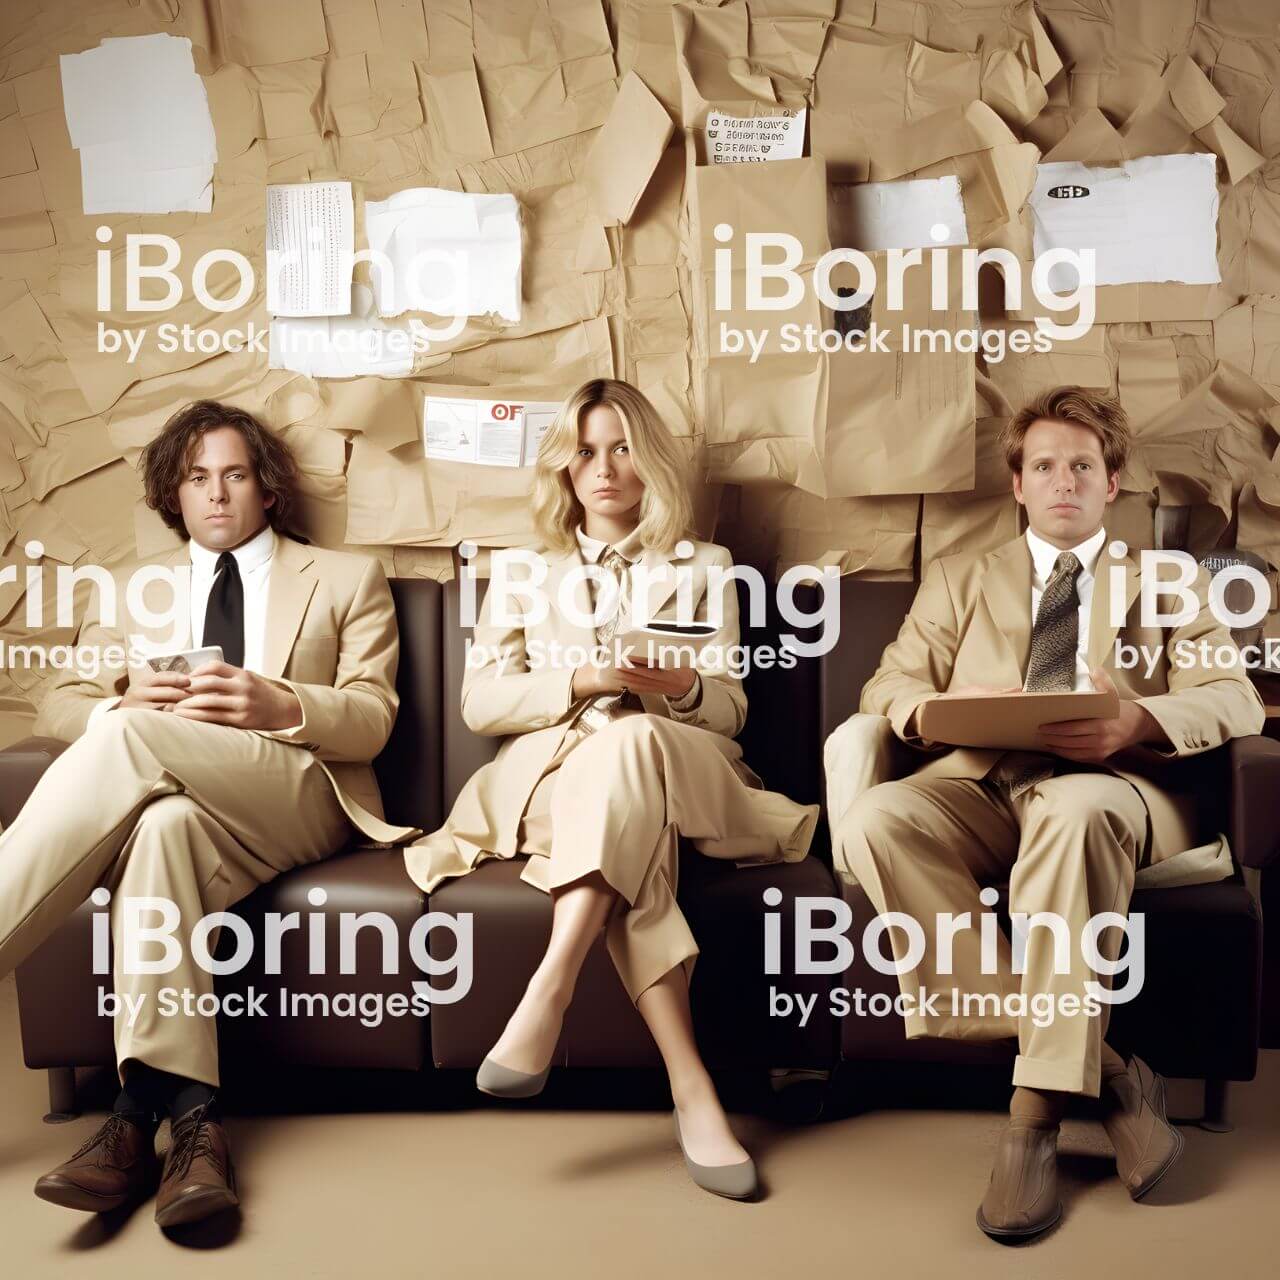 Funny satirical image of a generic business stock photo, generated in Midjourney.
There's 3 people in business attire sitting on a brown couch.  They are wearing beige and the wall is covered in beige.  
There's a watermark of a pretend company: iBoring by Stock Images.